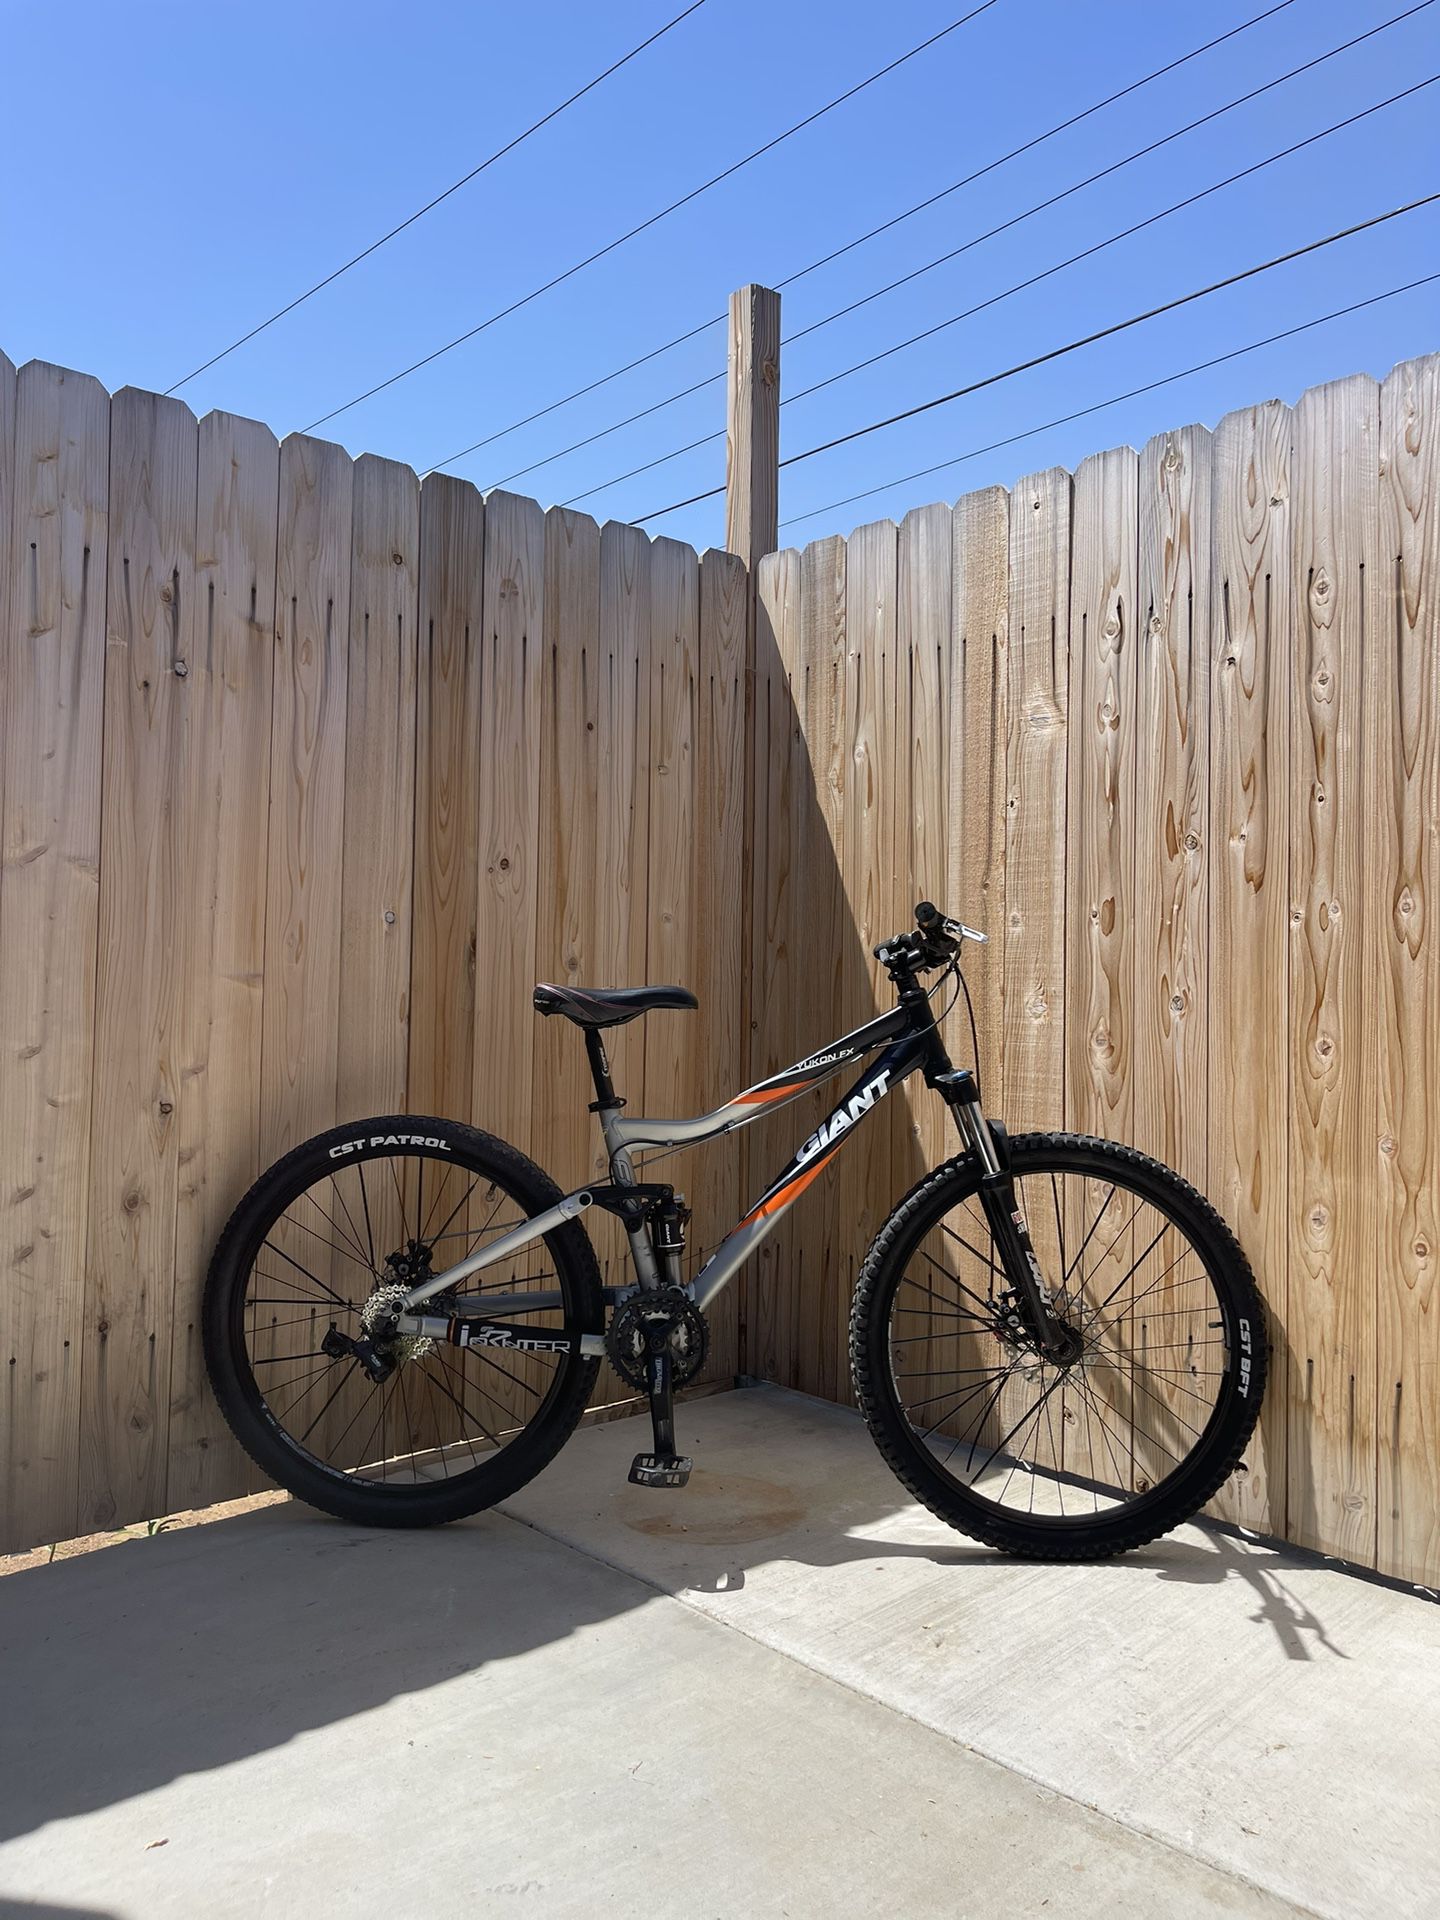 26 Inch Giant Yukon EX Full Suspension Mountain Bike Frame Size Small Need Some Work Open To Trades.needs a chain and the derailer connected 350 dolla